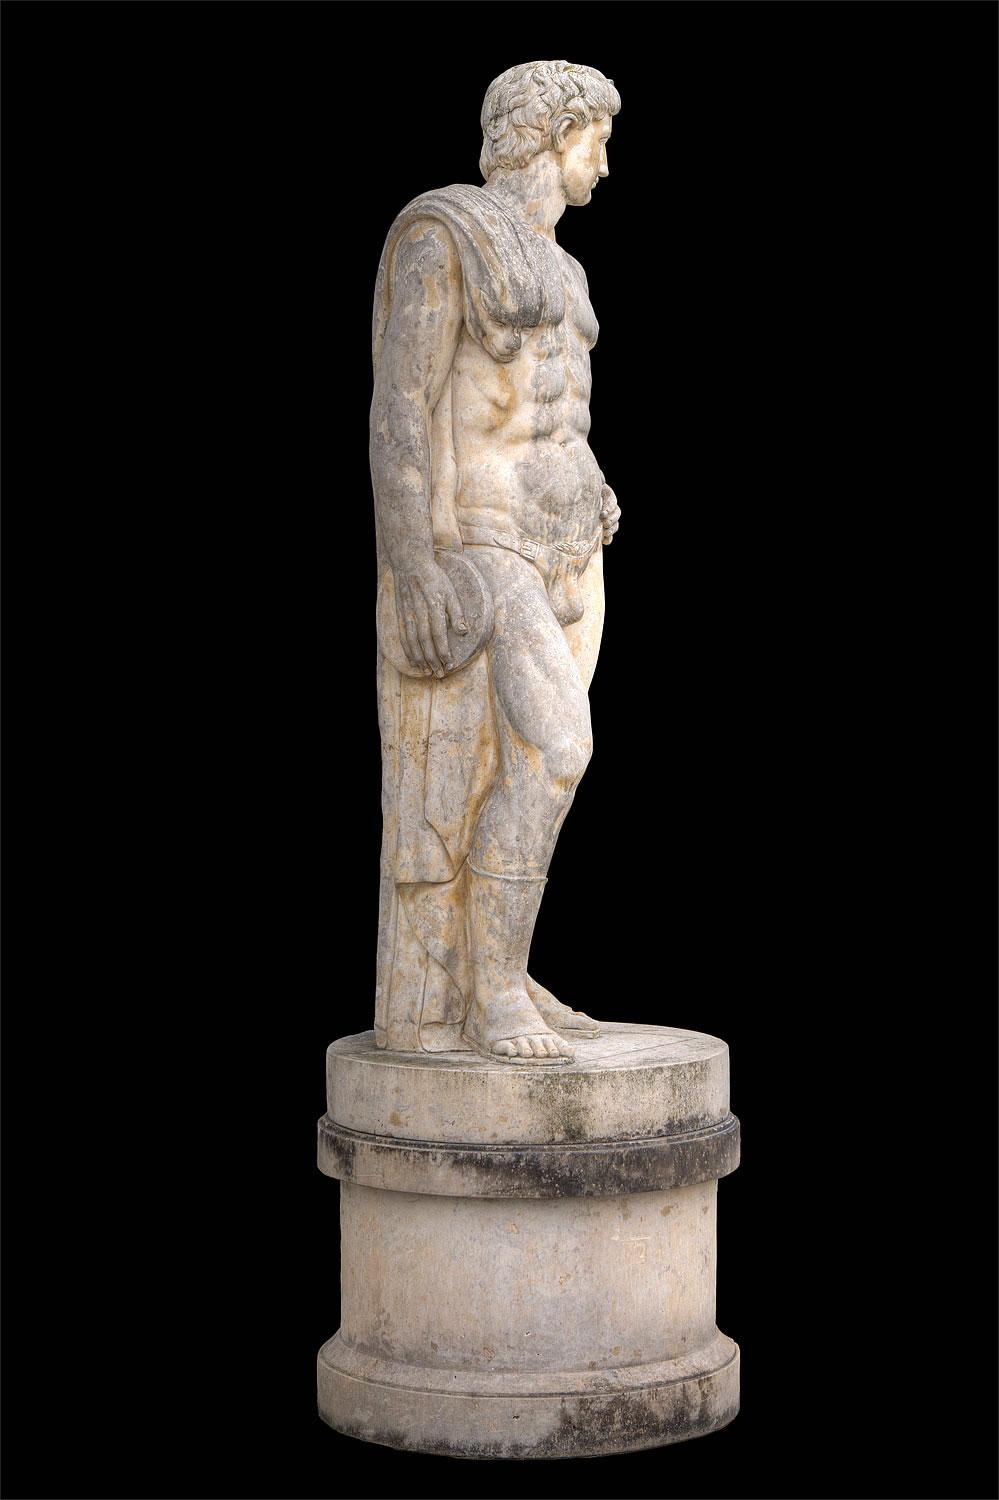  Monumental Italian Rationalist Marble Sculptures of Hercules and Discobolo For Sale 7